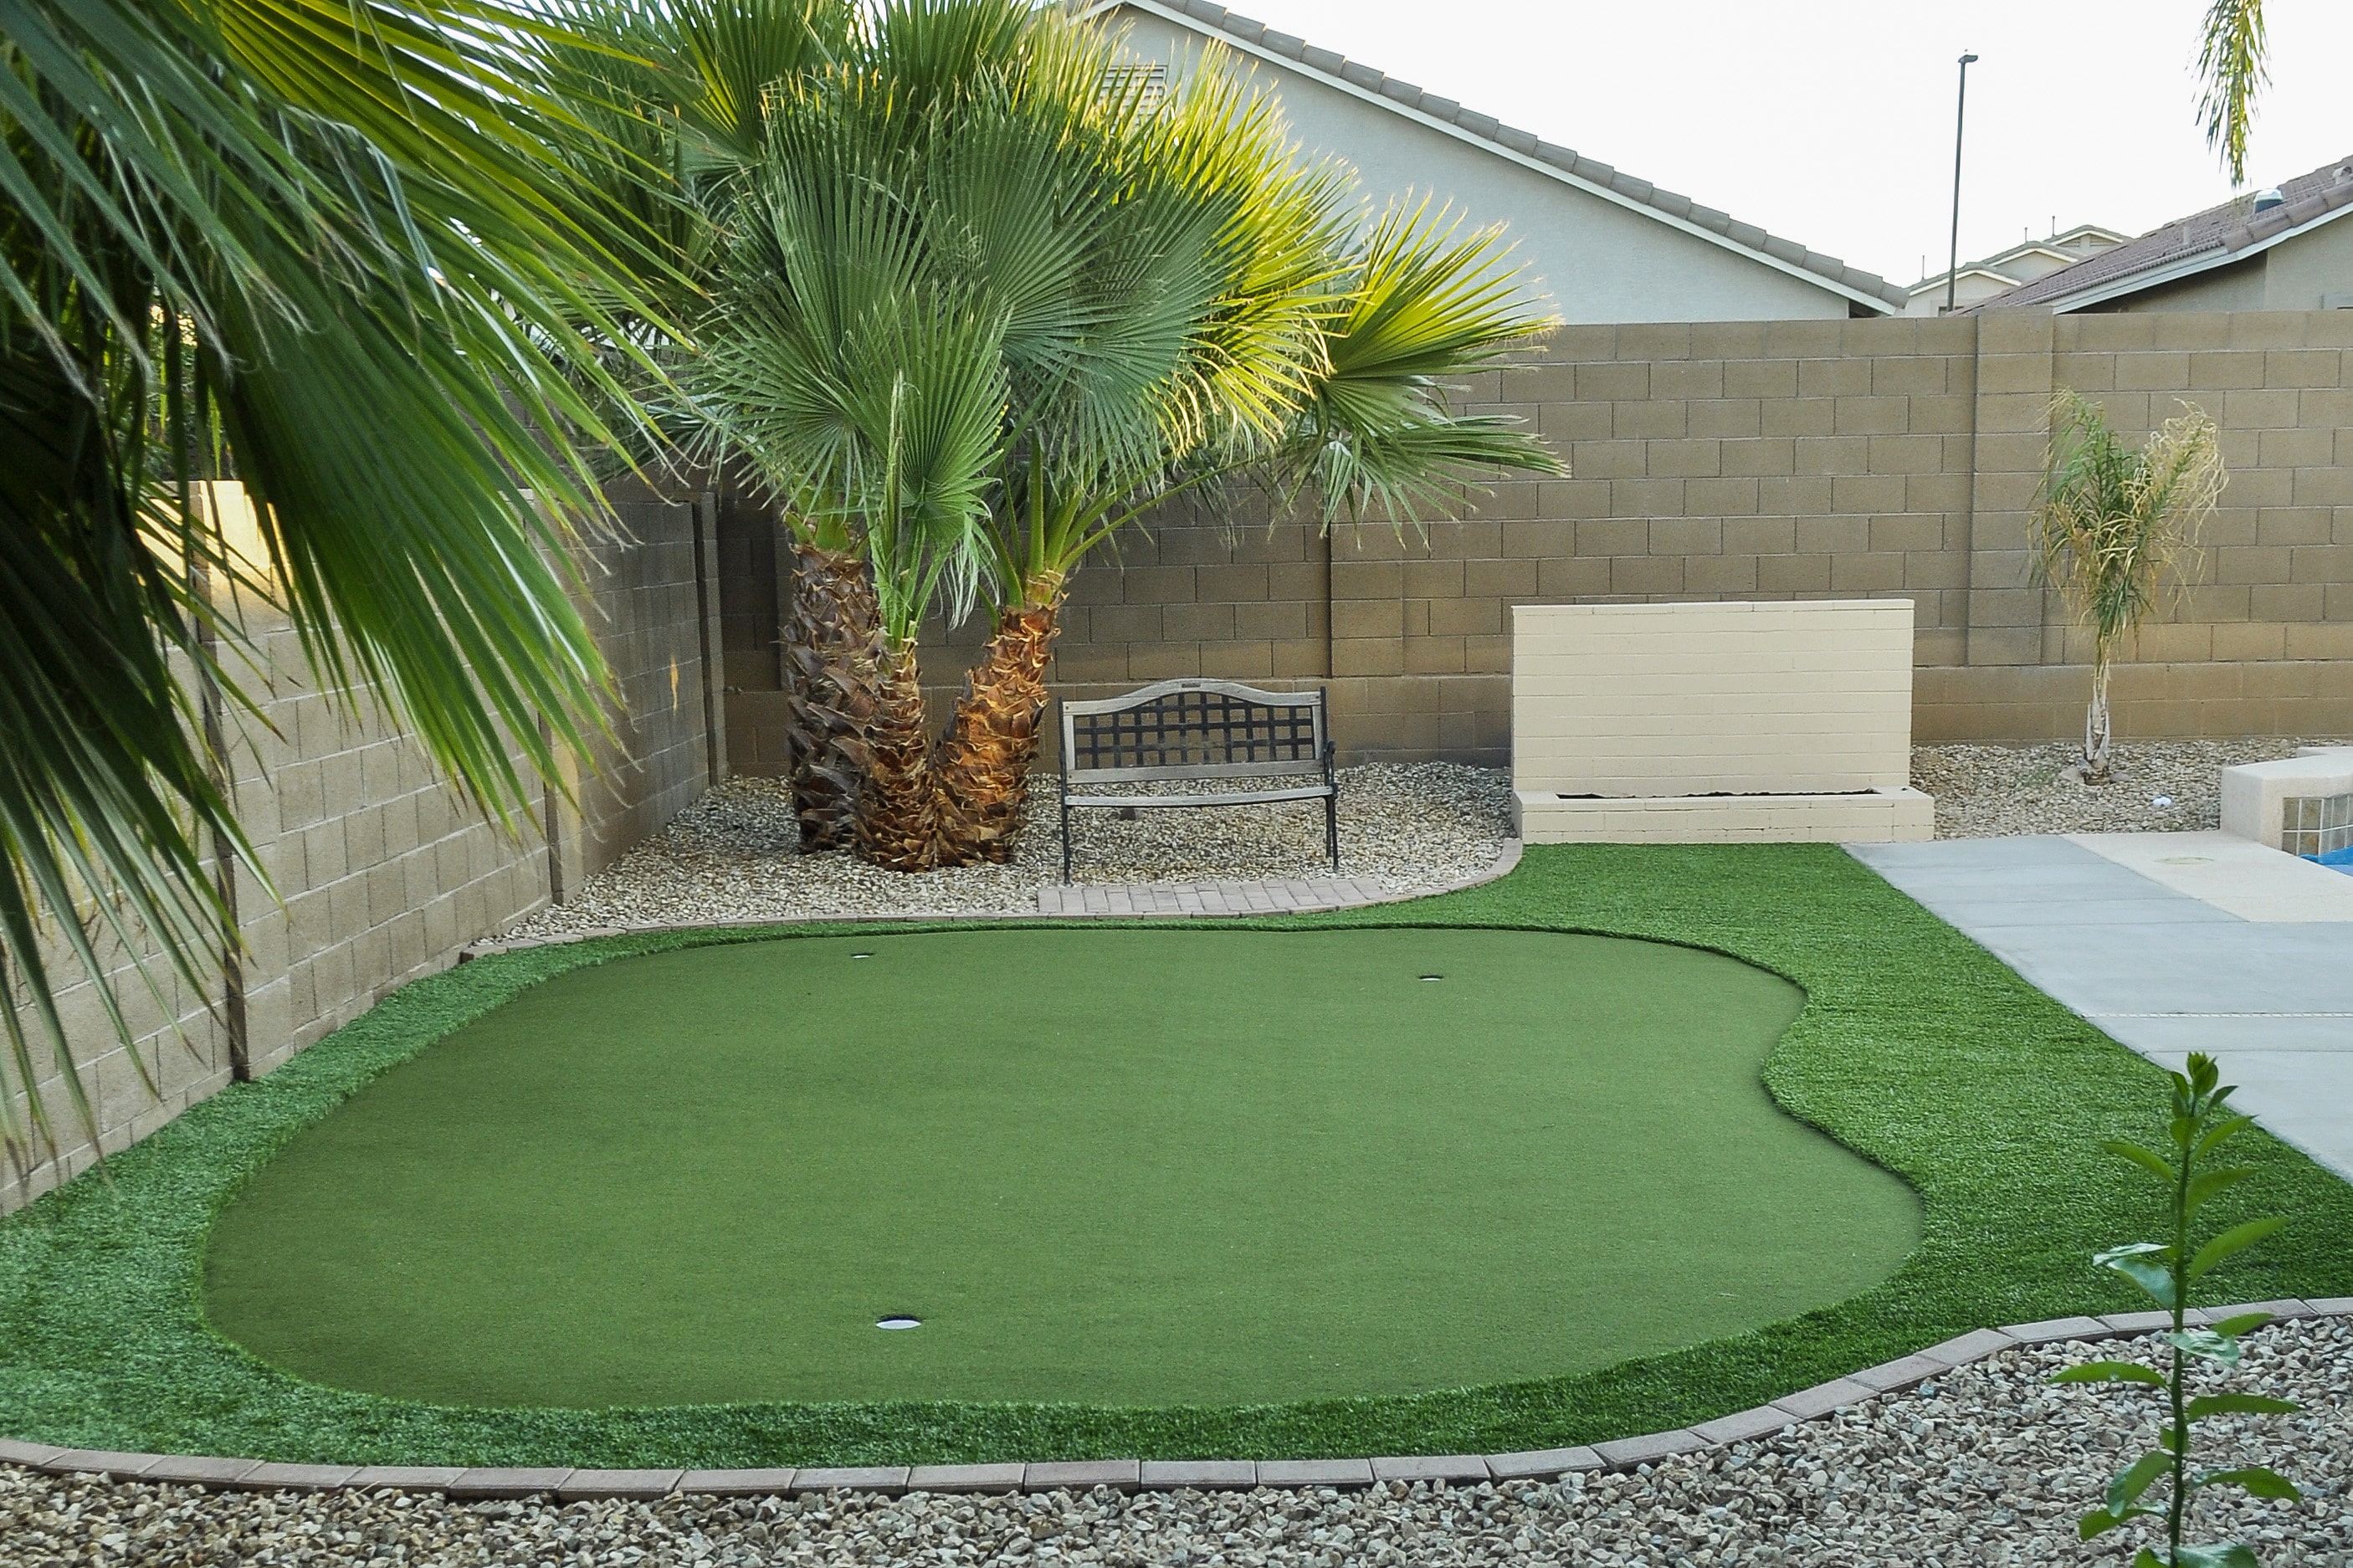 Another Turf Putting Green